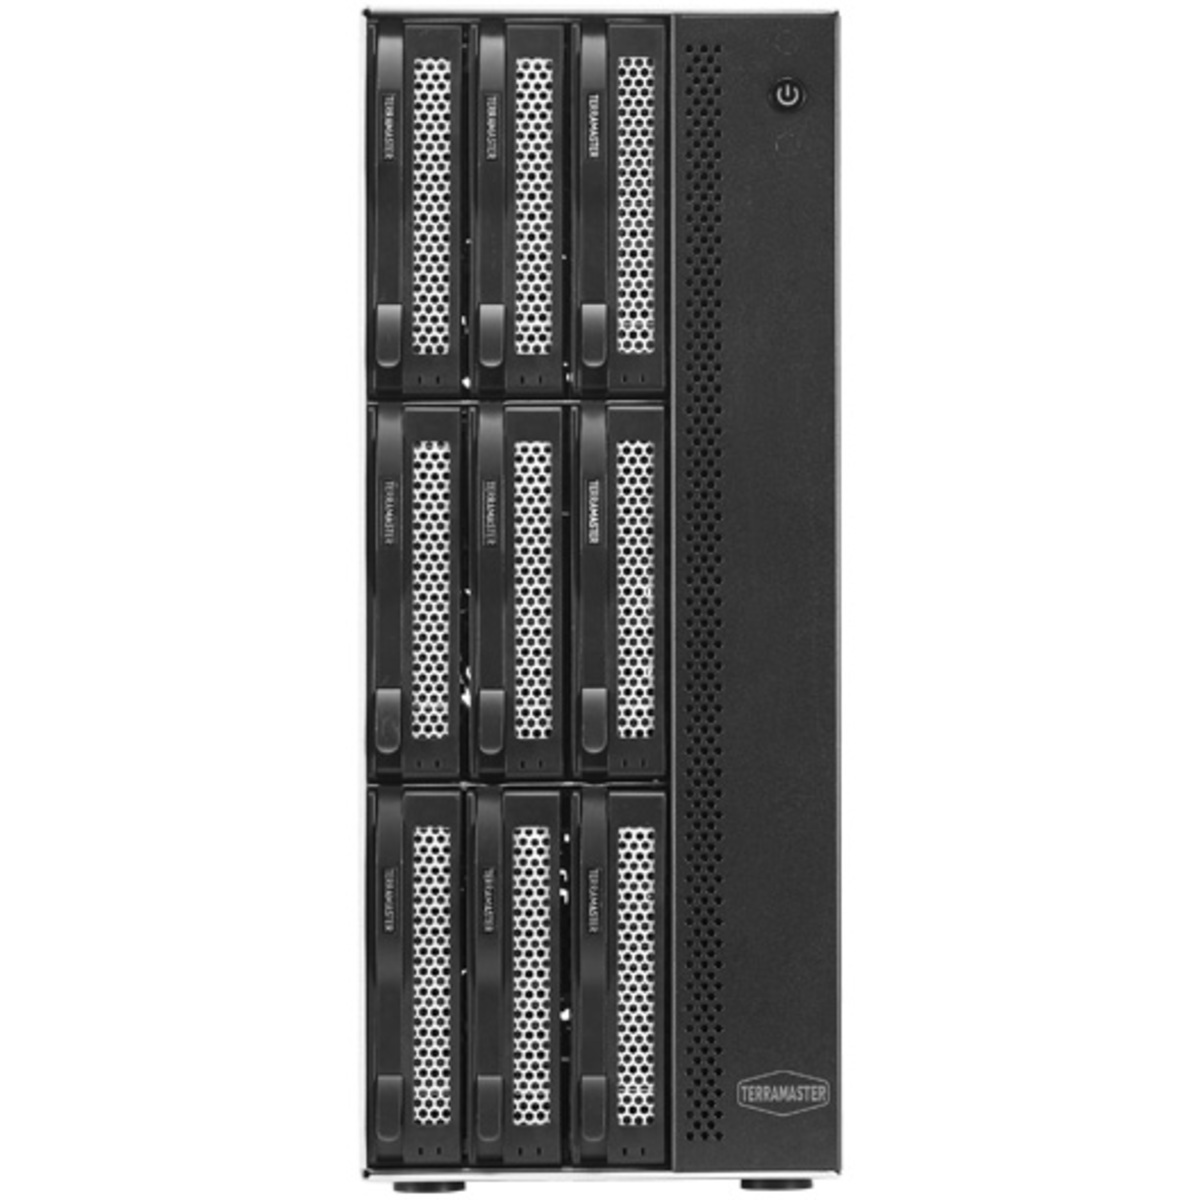 TerraMaster T9-450 Desktop 9-Bay Multimedia / Power User / Business NAS - Network Attached Storage Device Burn-In Tested Configurations T9-450